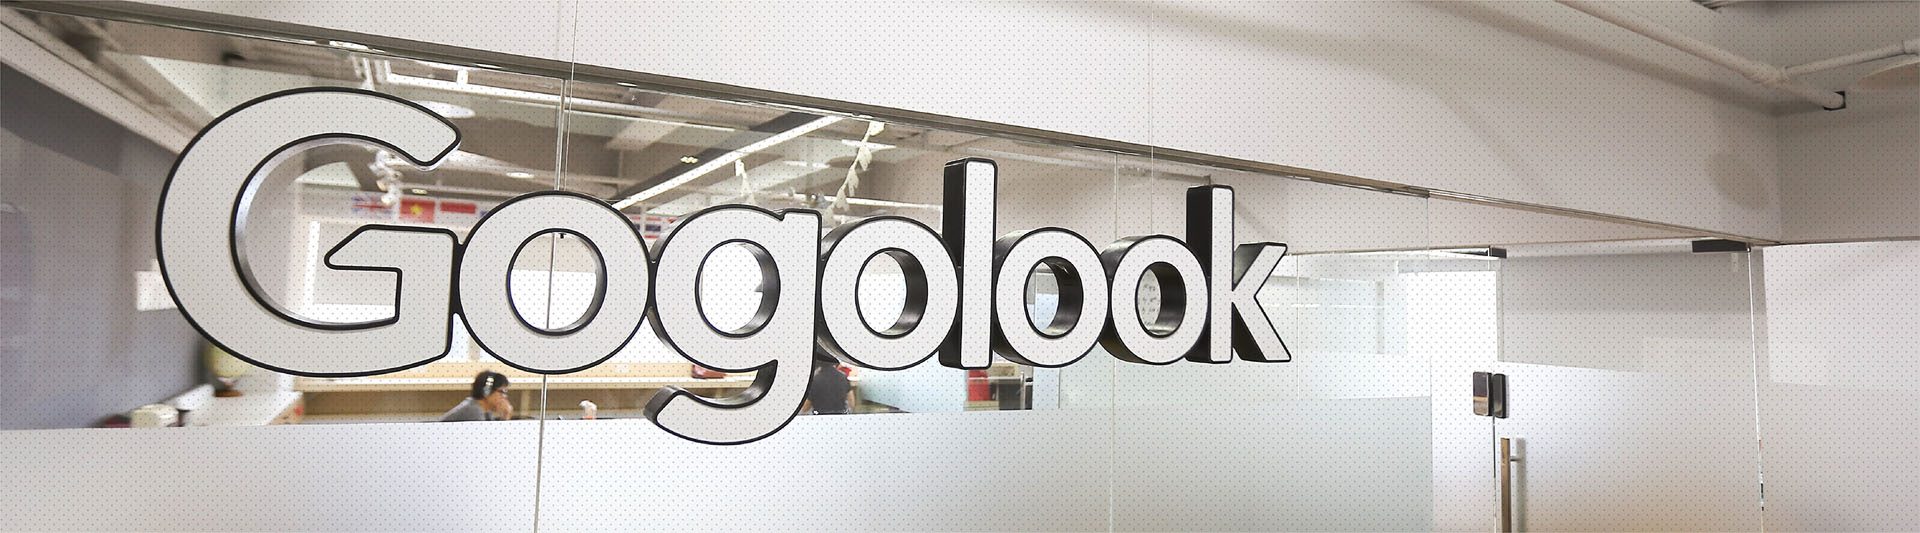 Taiwanese startup Gogolook, owner of caller ID app Whoscall, raises $11.7m in funding